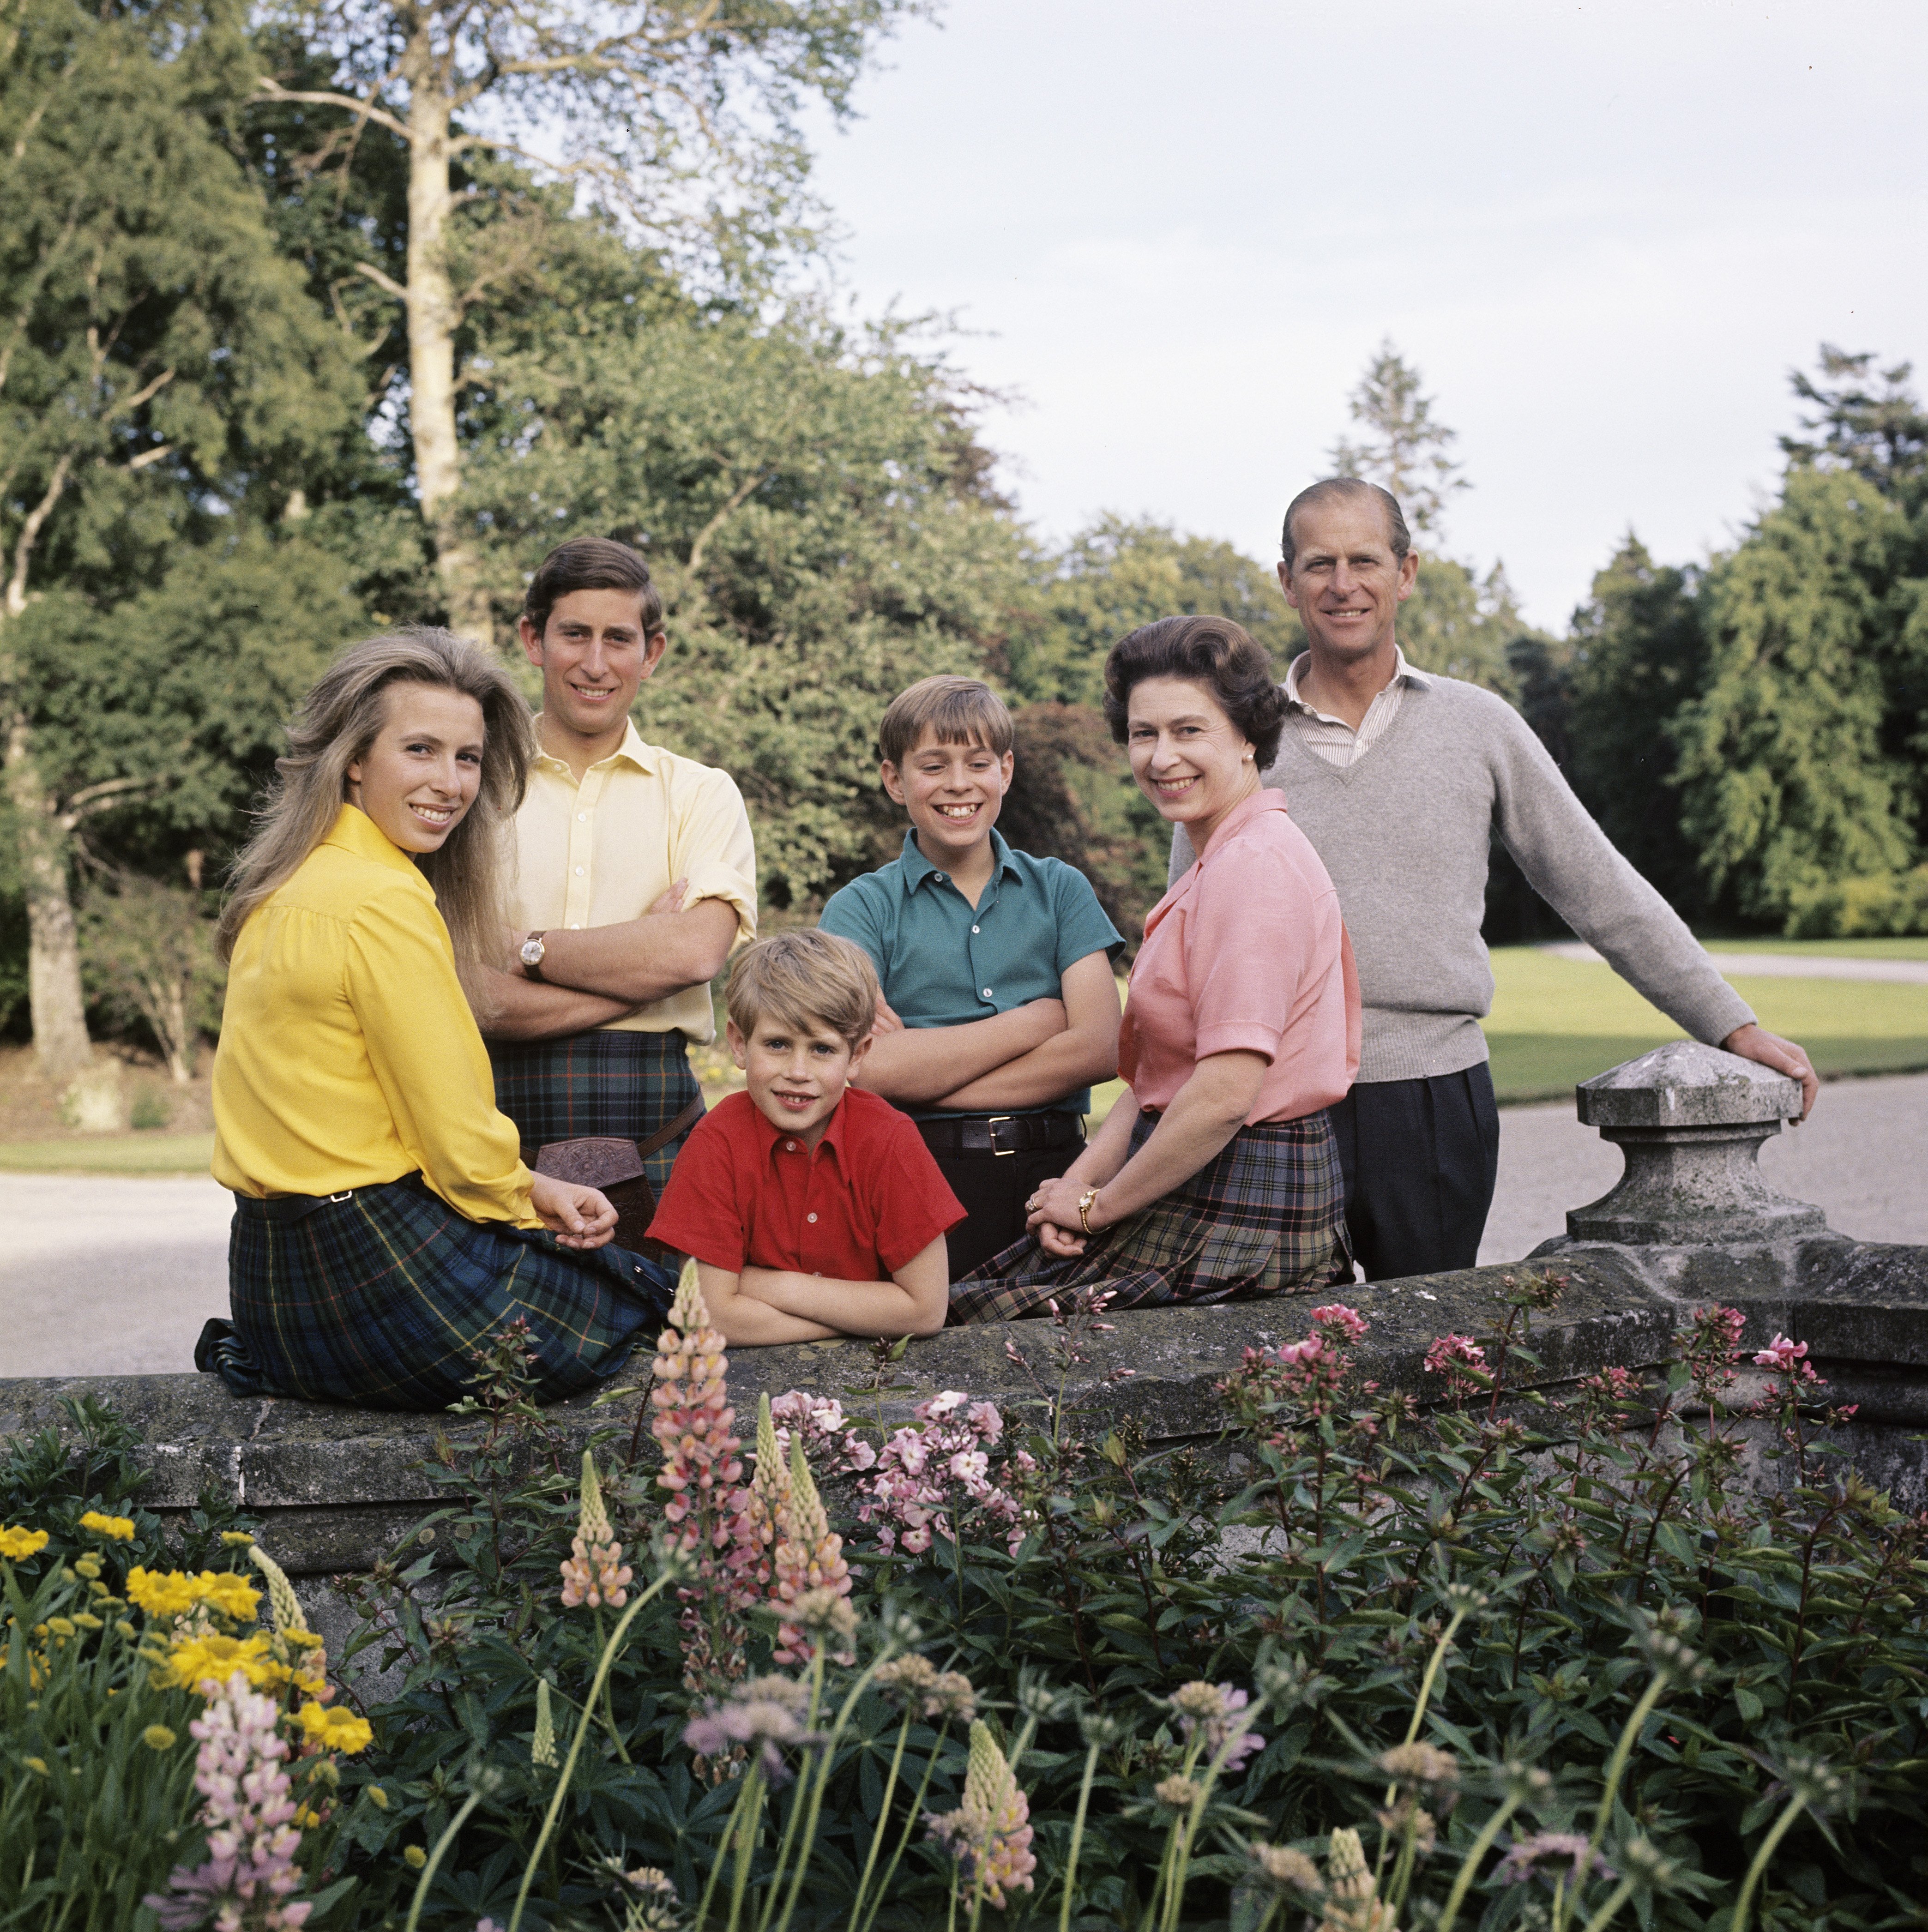 Queen Elizabeth with her husband, Prince Philip and children Prince Charles, Prince Andrew, Prince Edward and Princess Anne during the Royal Family's annual summer holiday at Balmoral Castle on August 22, 1972 in Balmoral, Scotland | Source: Getty Images